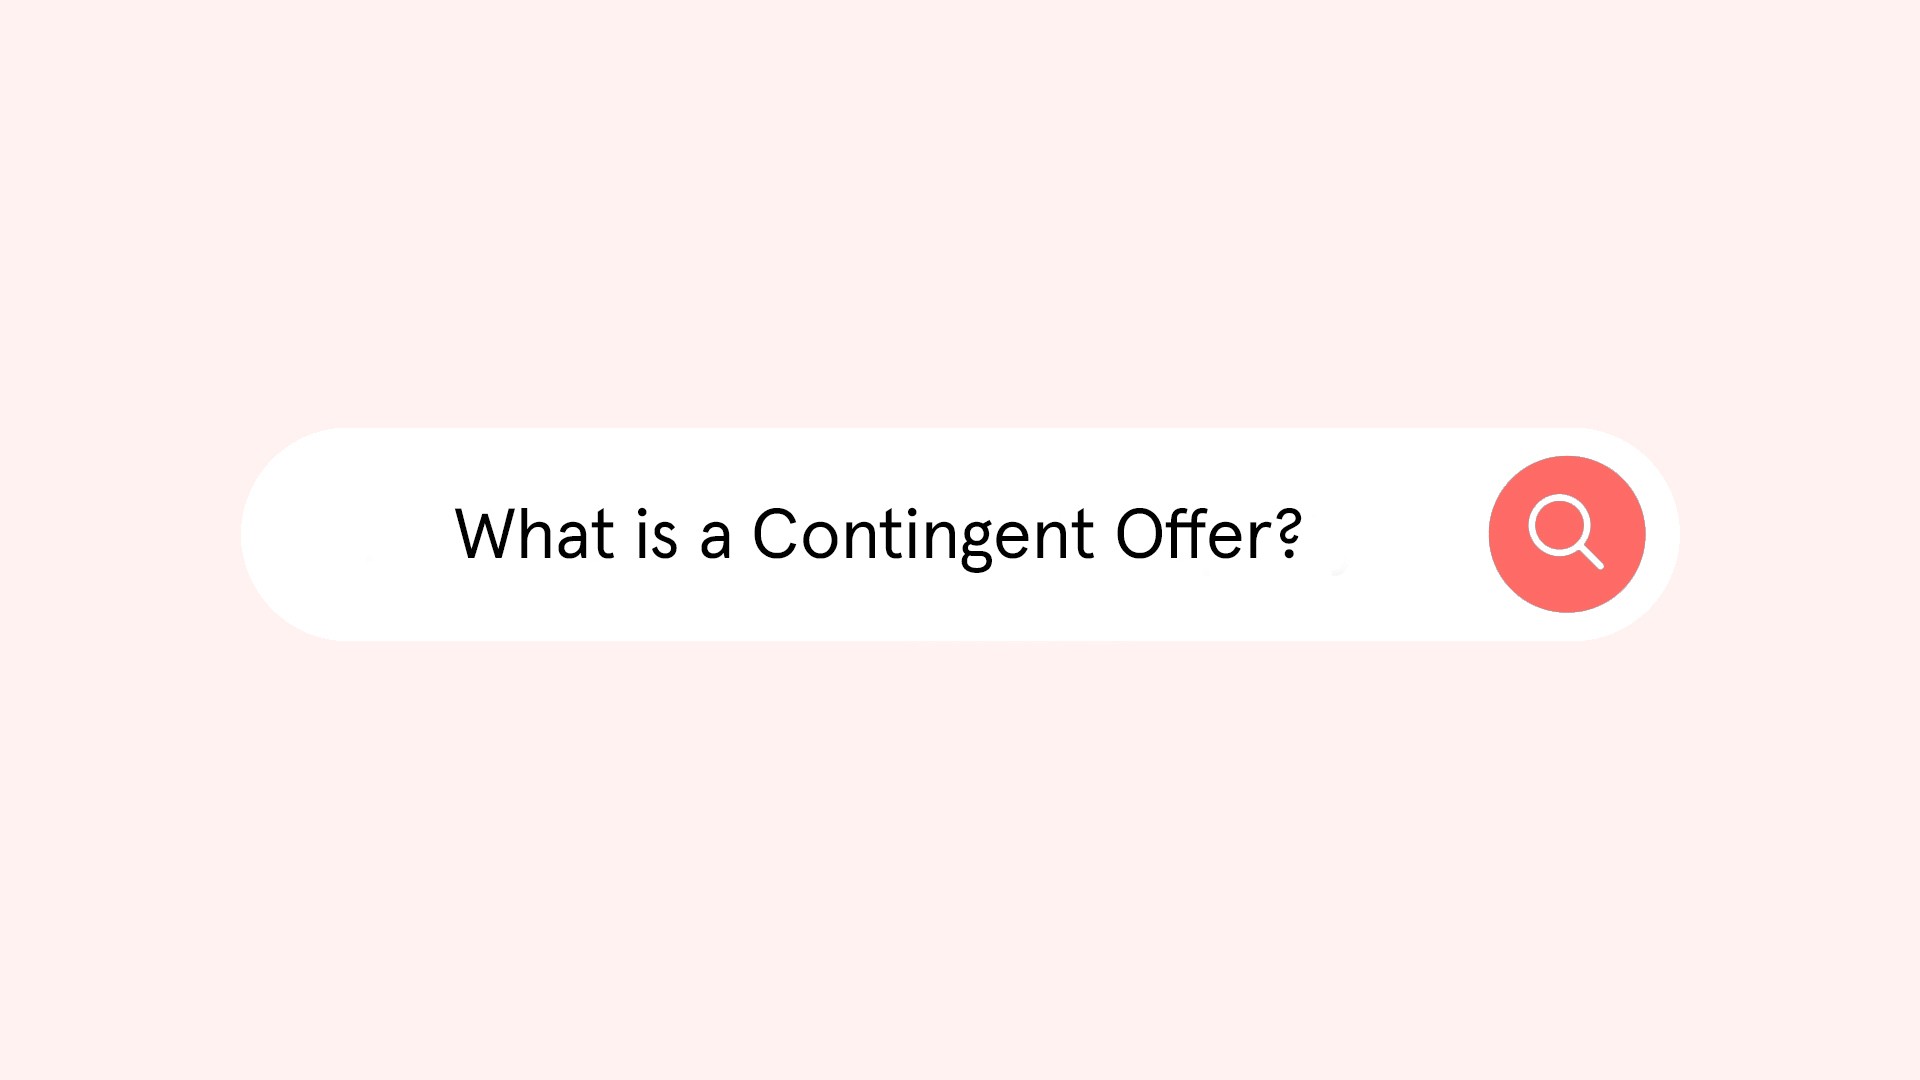 What is a Contingent Offer?